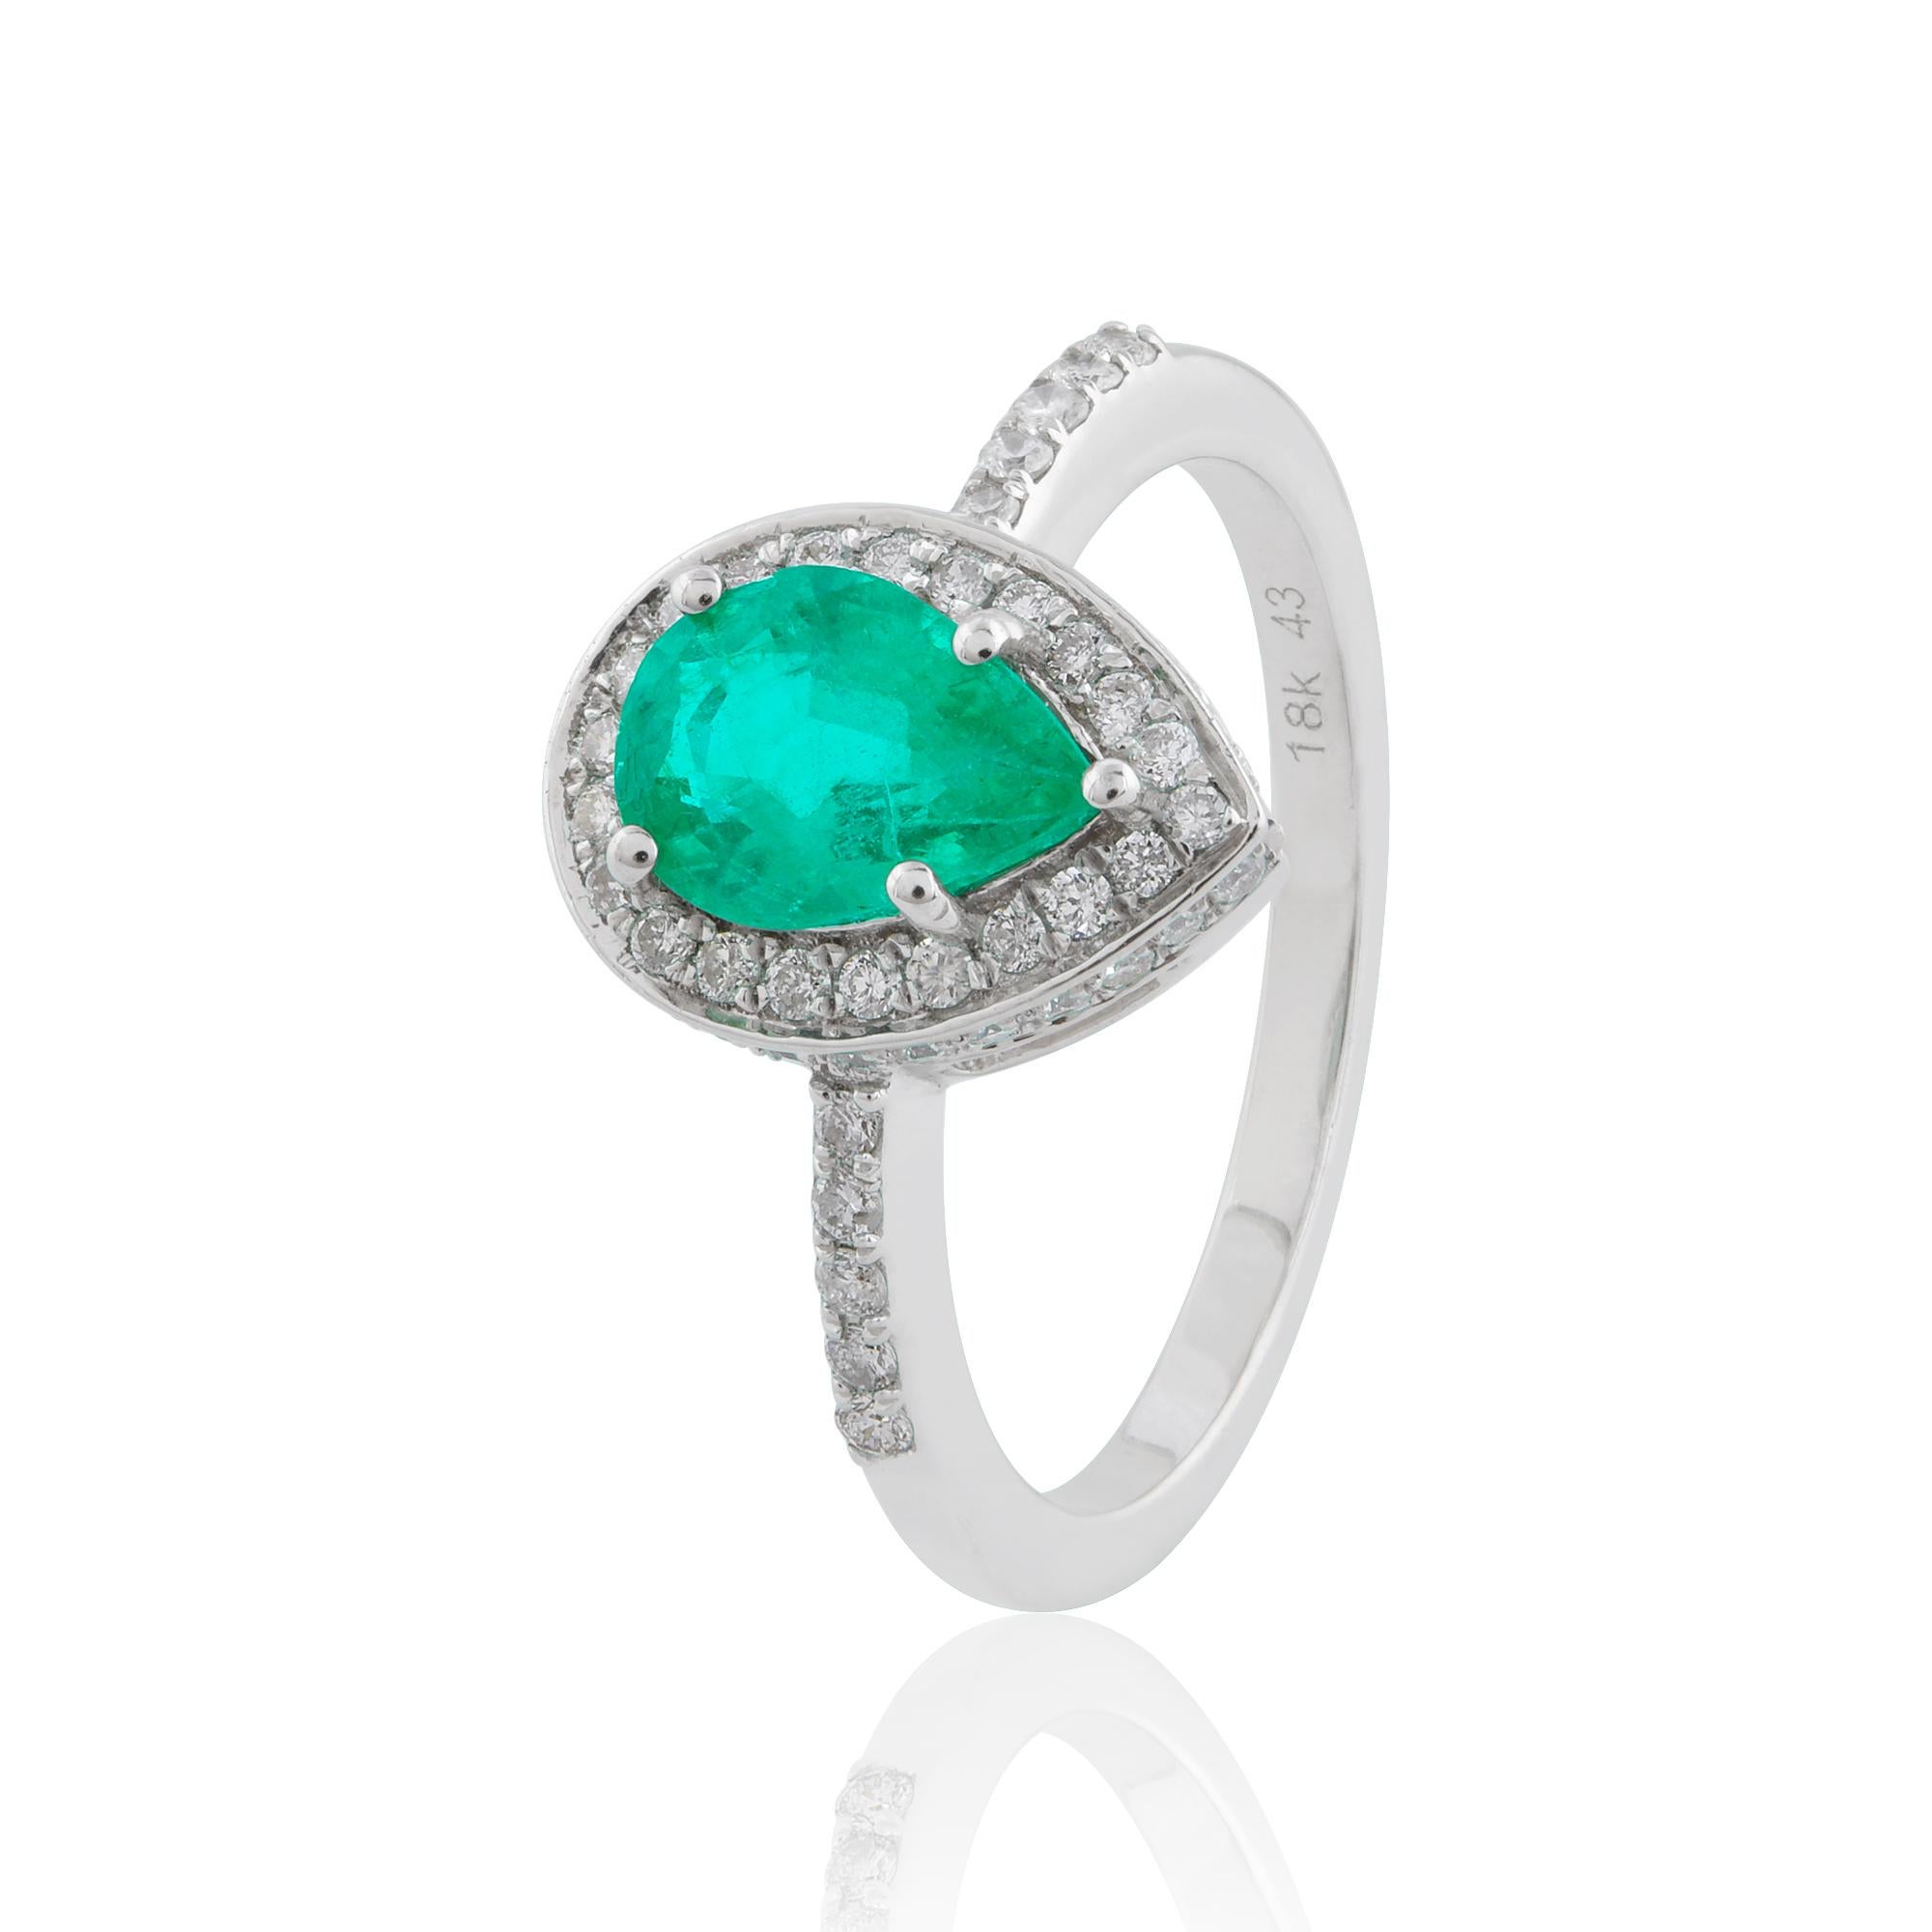 Women's 1.40 Tcw Pear Natural Emerald Gemstone Halo Ring Diamond 14k White Gold Jewelry For Sale